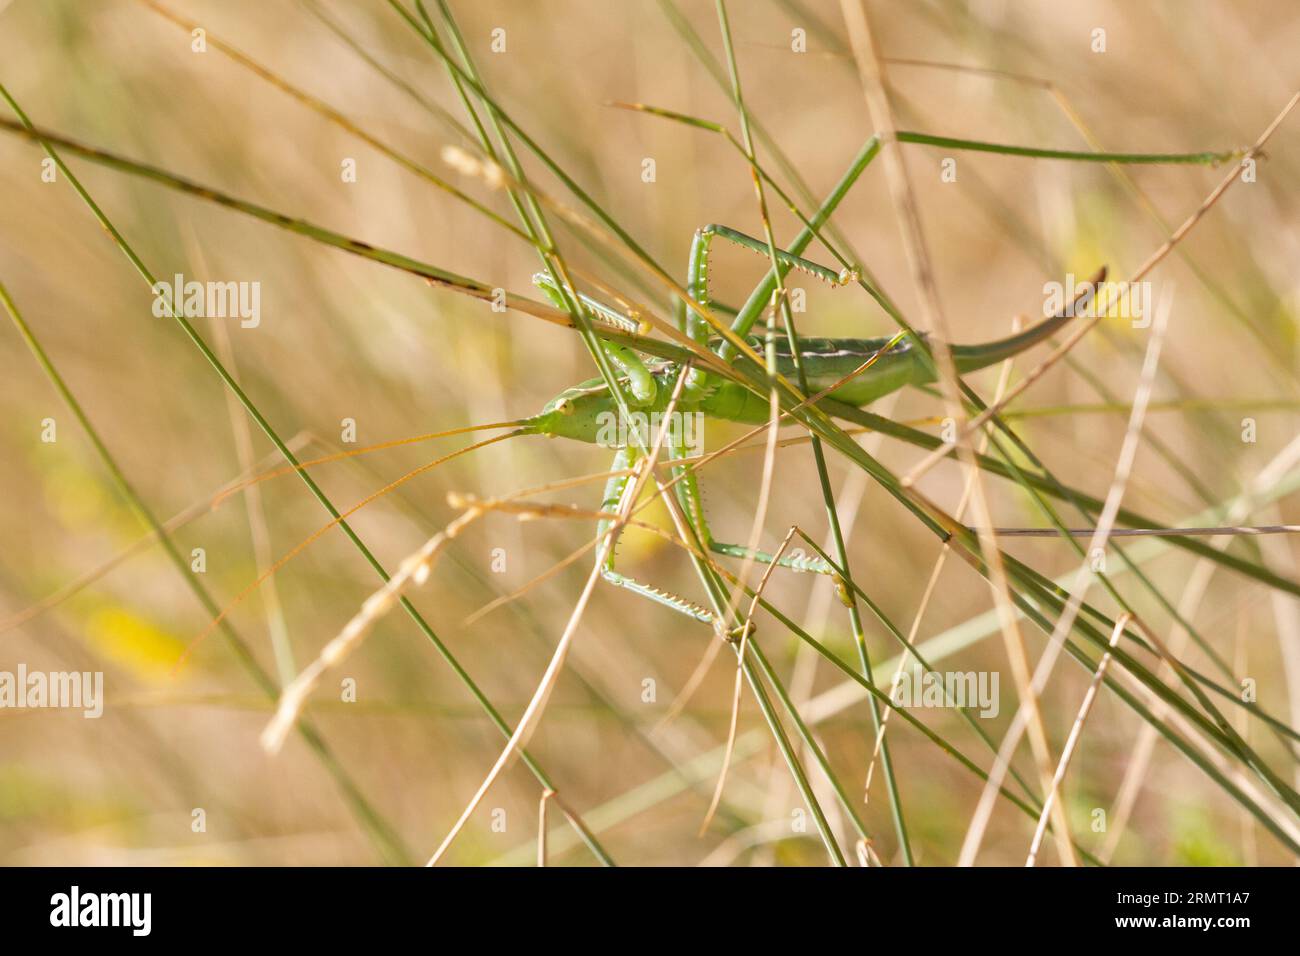 The rare Predatory bush cricket (Saga pedo) from Aosta Valley, IT, a protected species in Europe. The biggest cricket in Europe. Parthenogenetic. Stock Photo